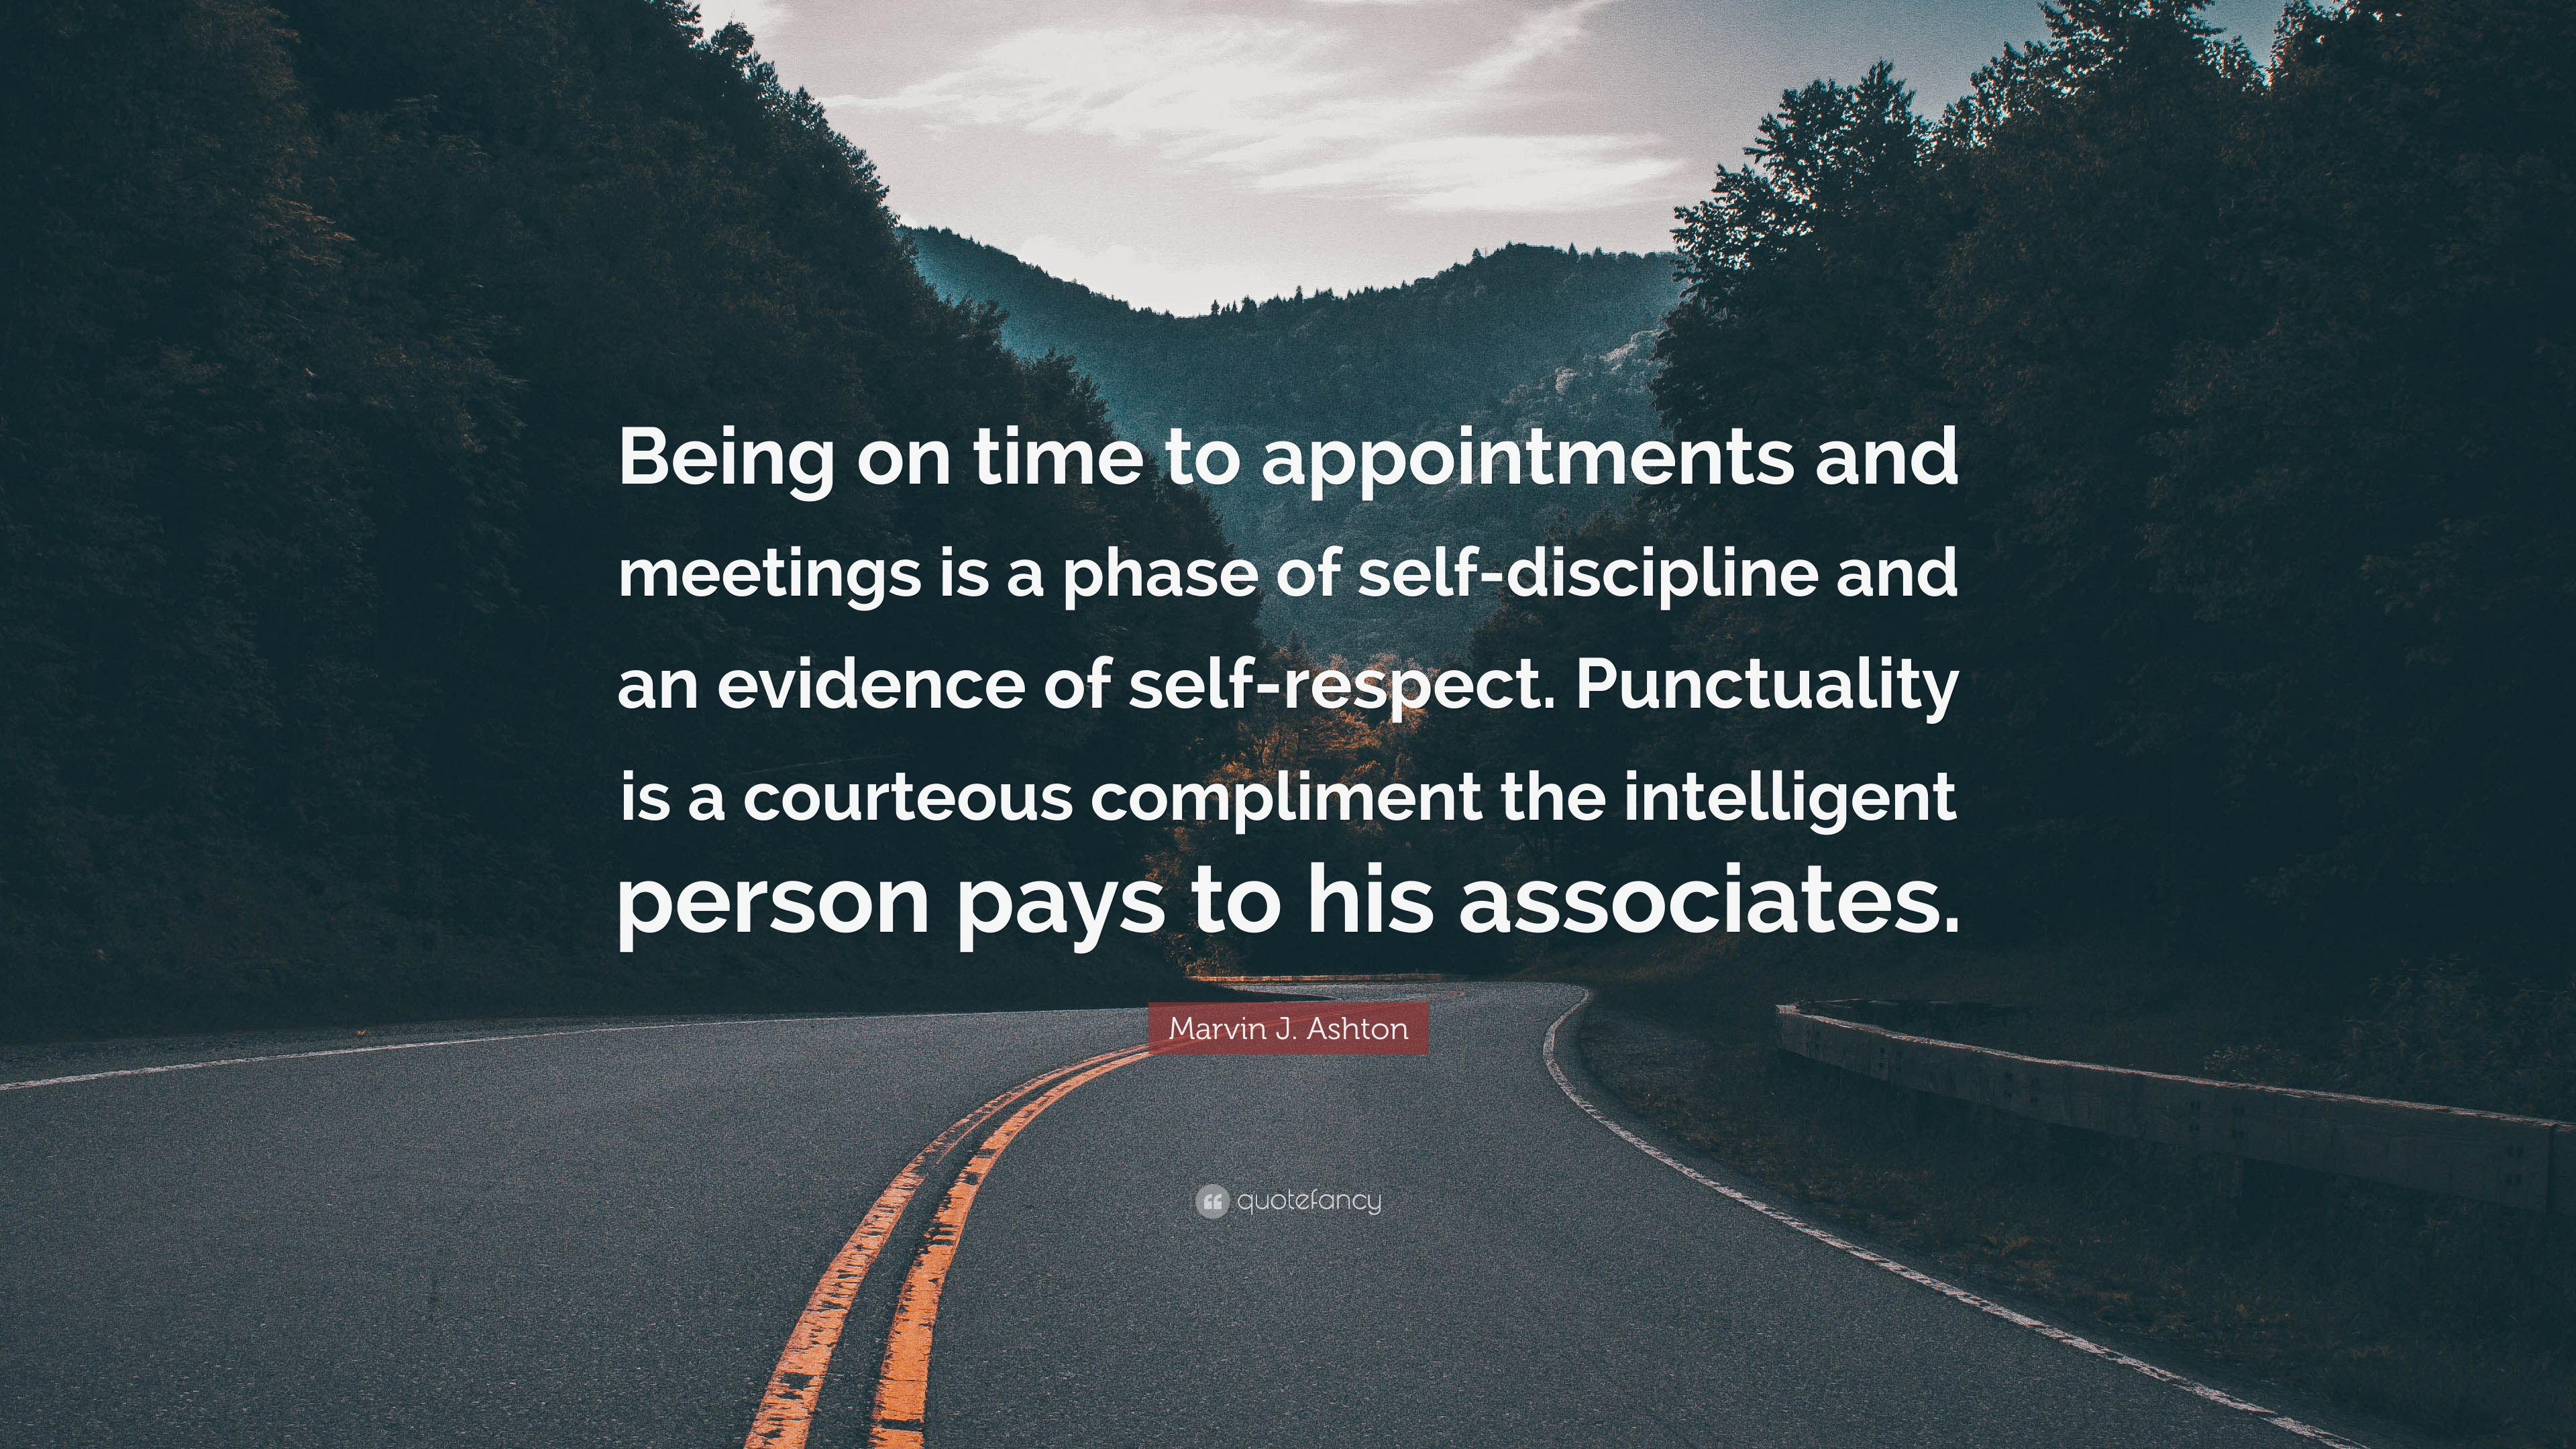 Marvin J. Ashton Quote: “Being on time to appointments and meetings is